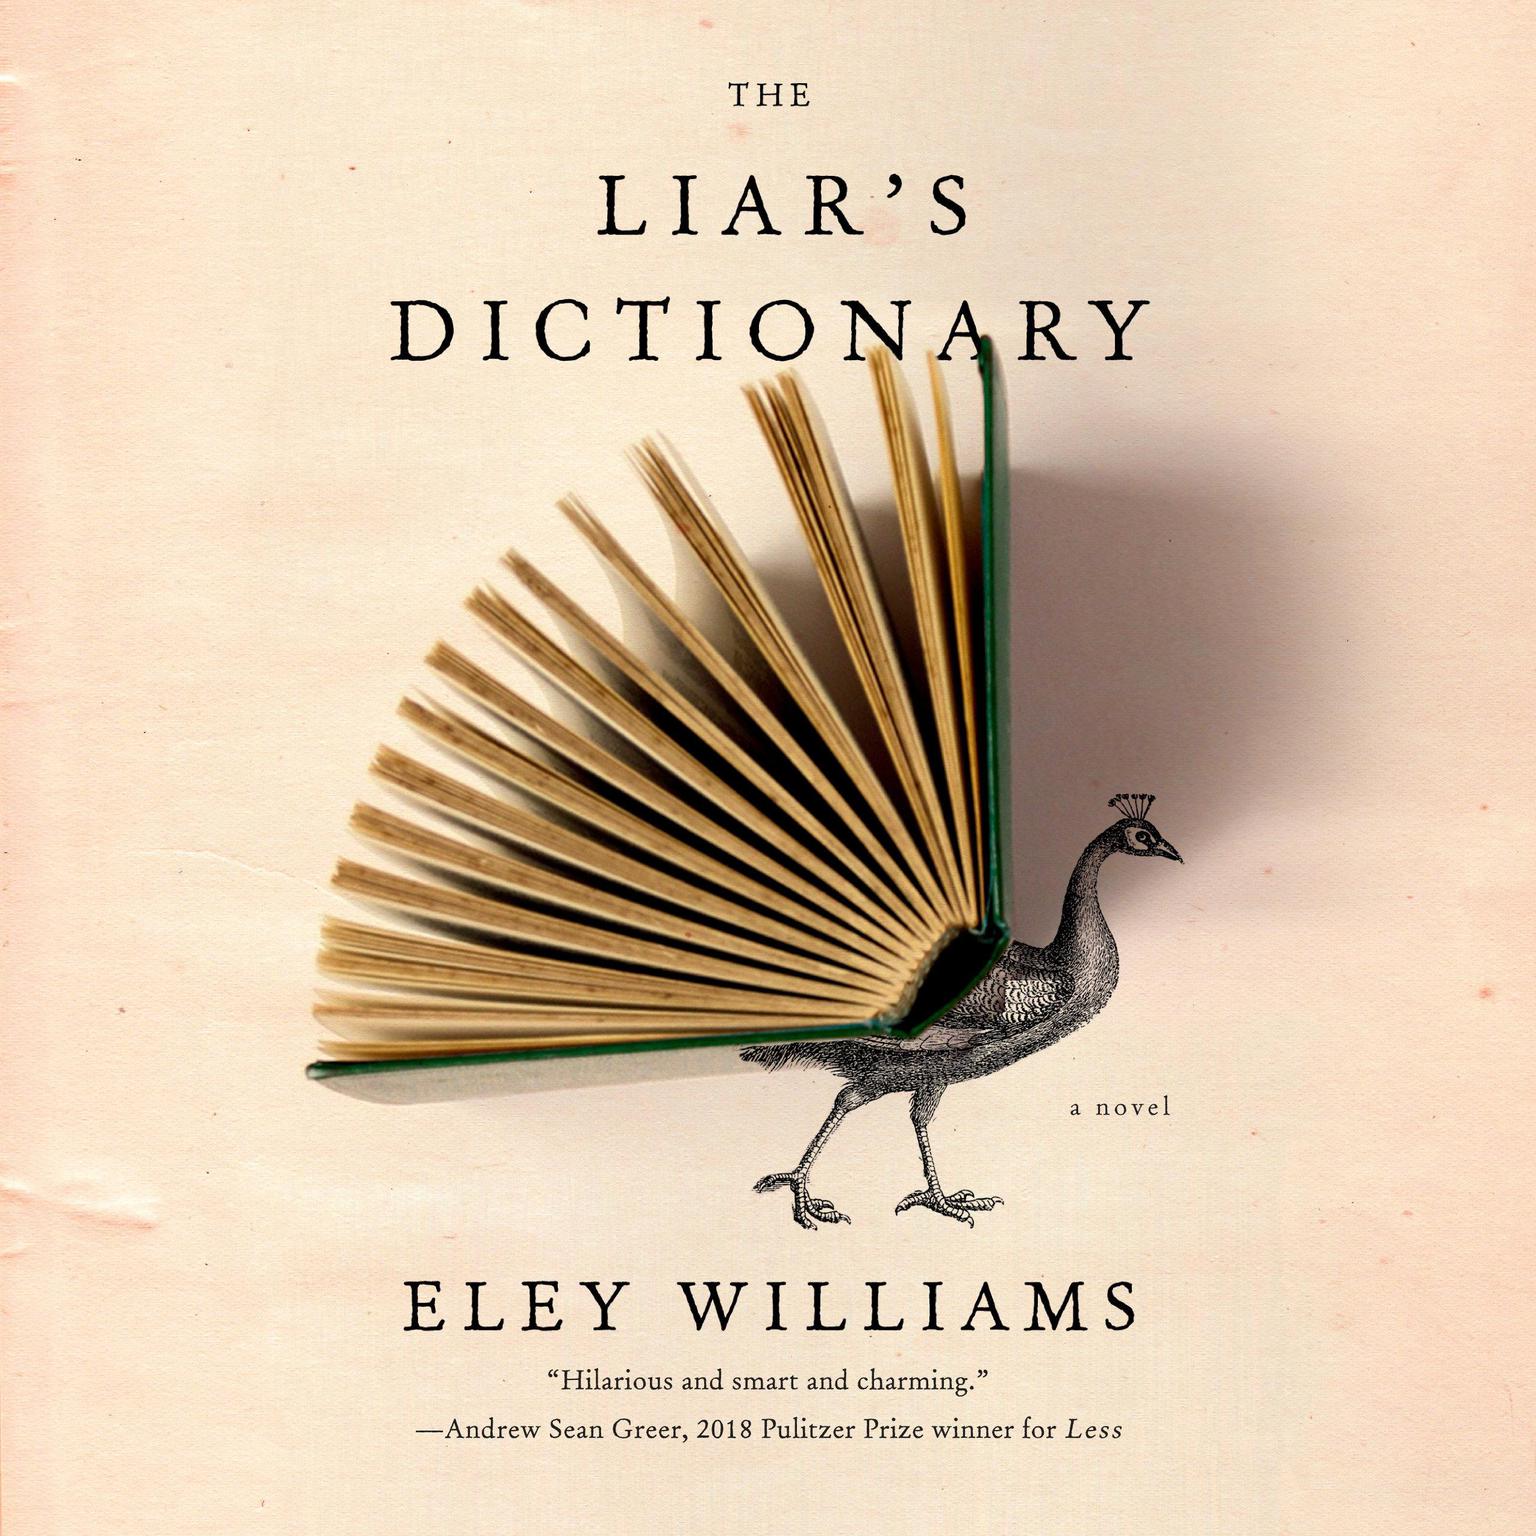 The Liars Dictionary: A Novel Audiobook, by Eley Williams